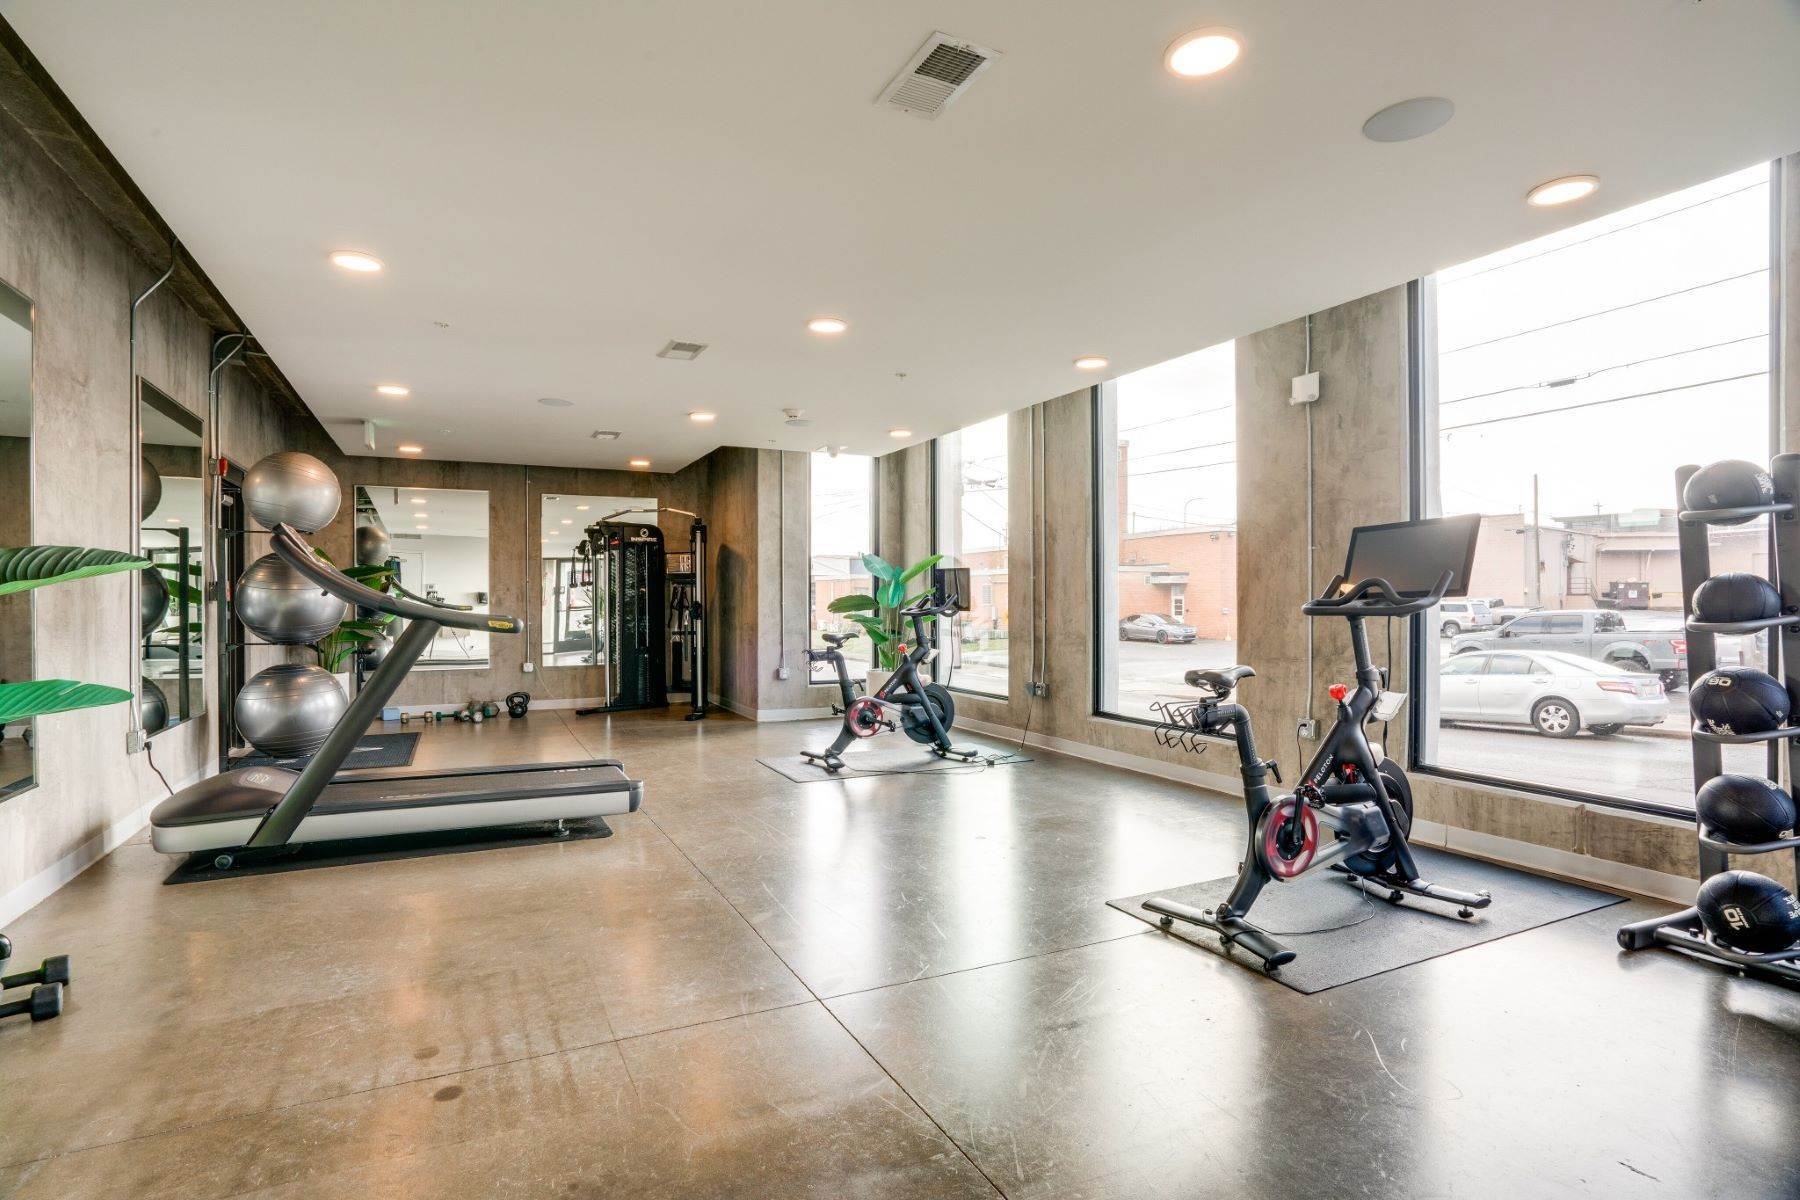 26. Condominiums for Sale at 806 Olympic St, Nashville, TN, 37203 806 Olympic St, #408 Nashville, Tennessee 37203 United States